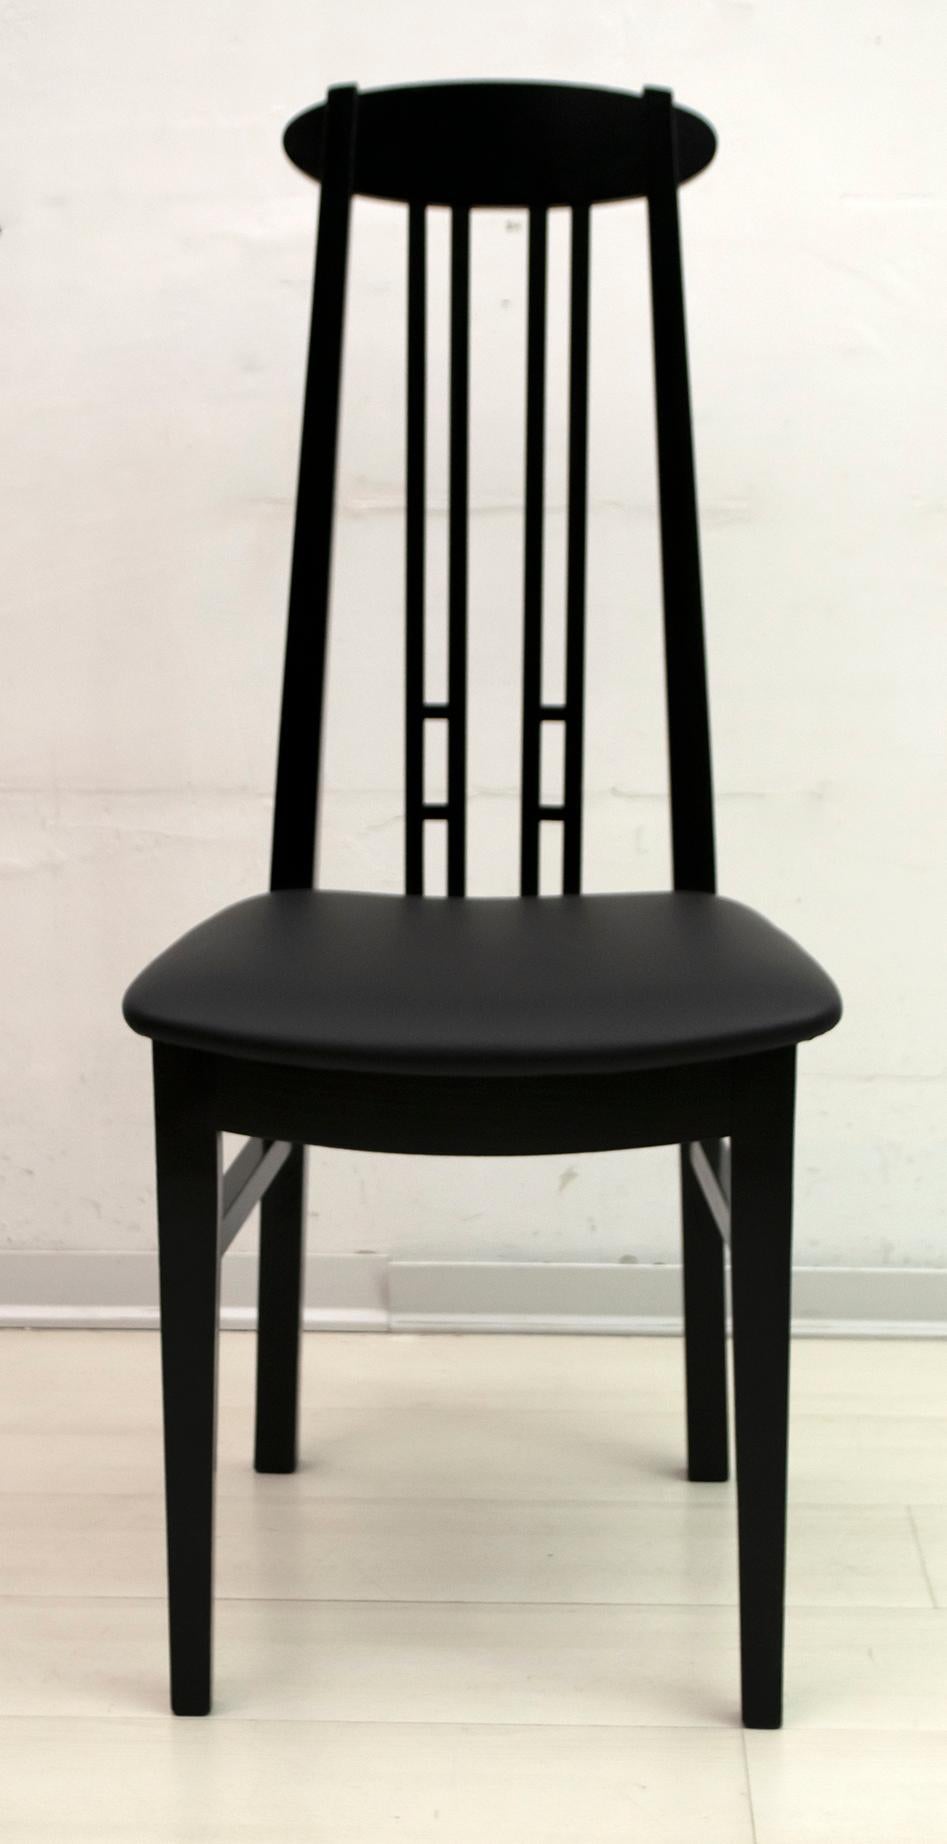 Late 20th Century After Charles Rennie Mackintosh 6 Black Lacquered High-Backed Chairs, 1979